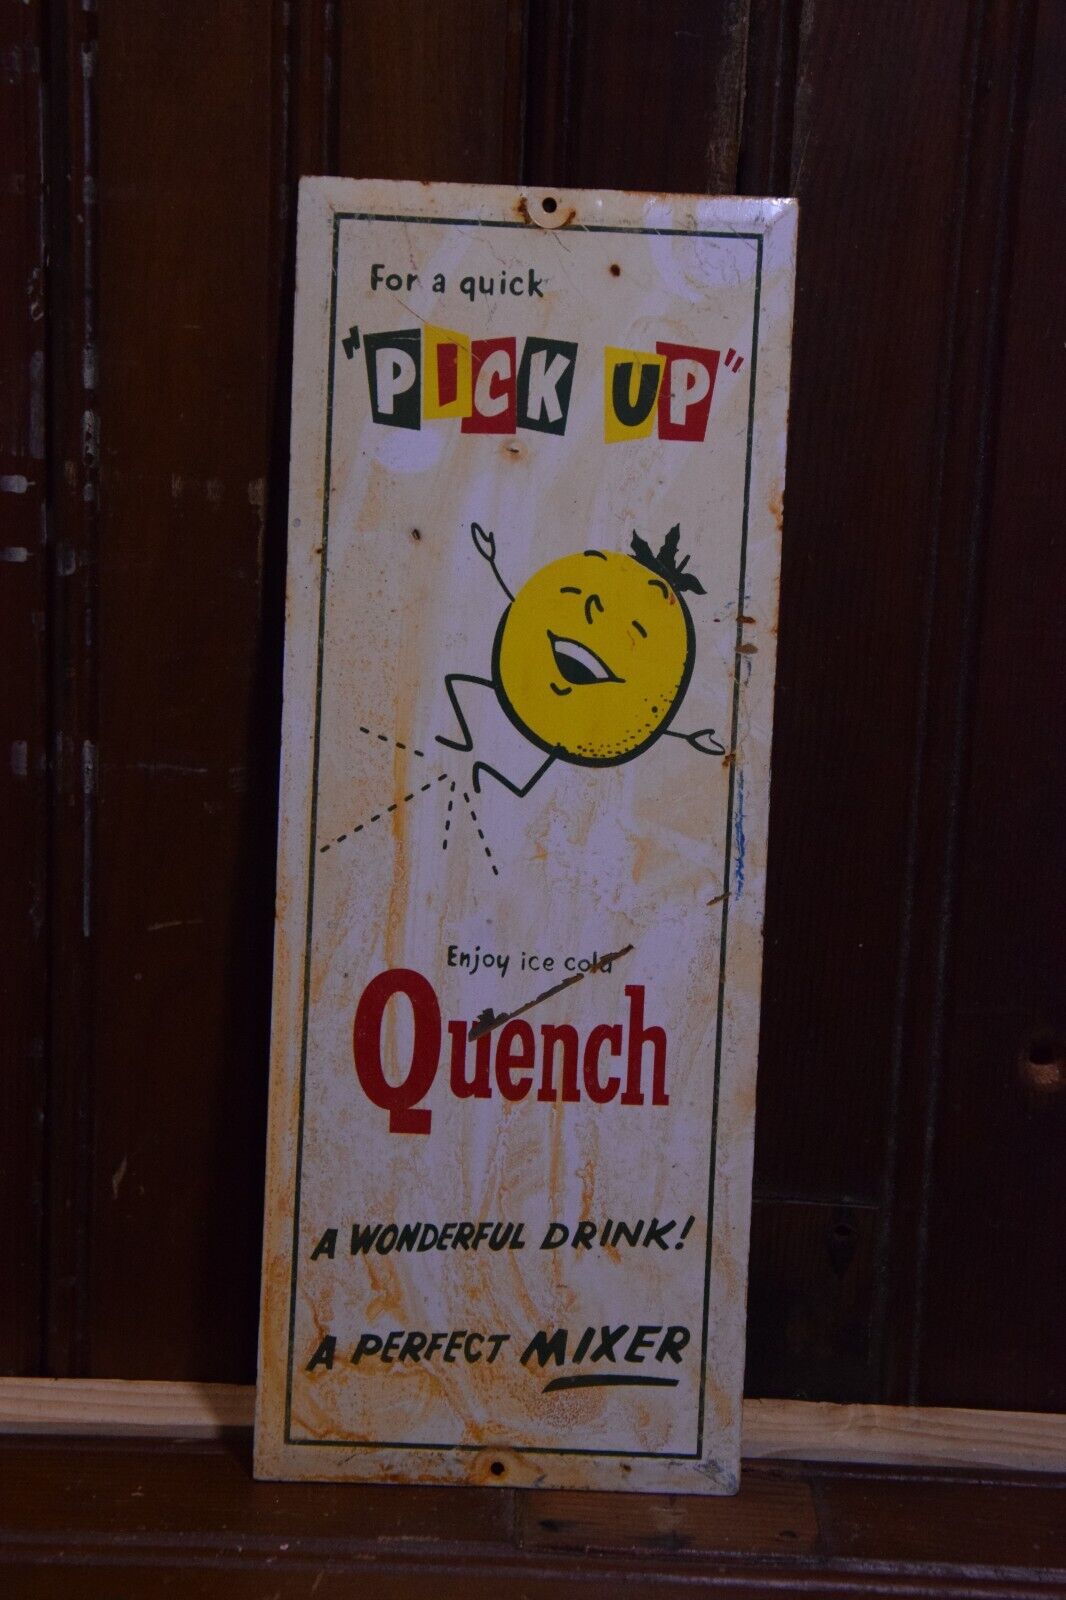 1950'S PICK UP QUENCH PERFECT DRINK MIXER STAMPED PAINTED METAL SIGN LEMON SODA